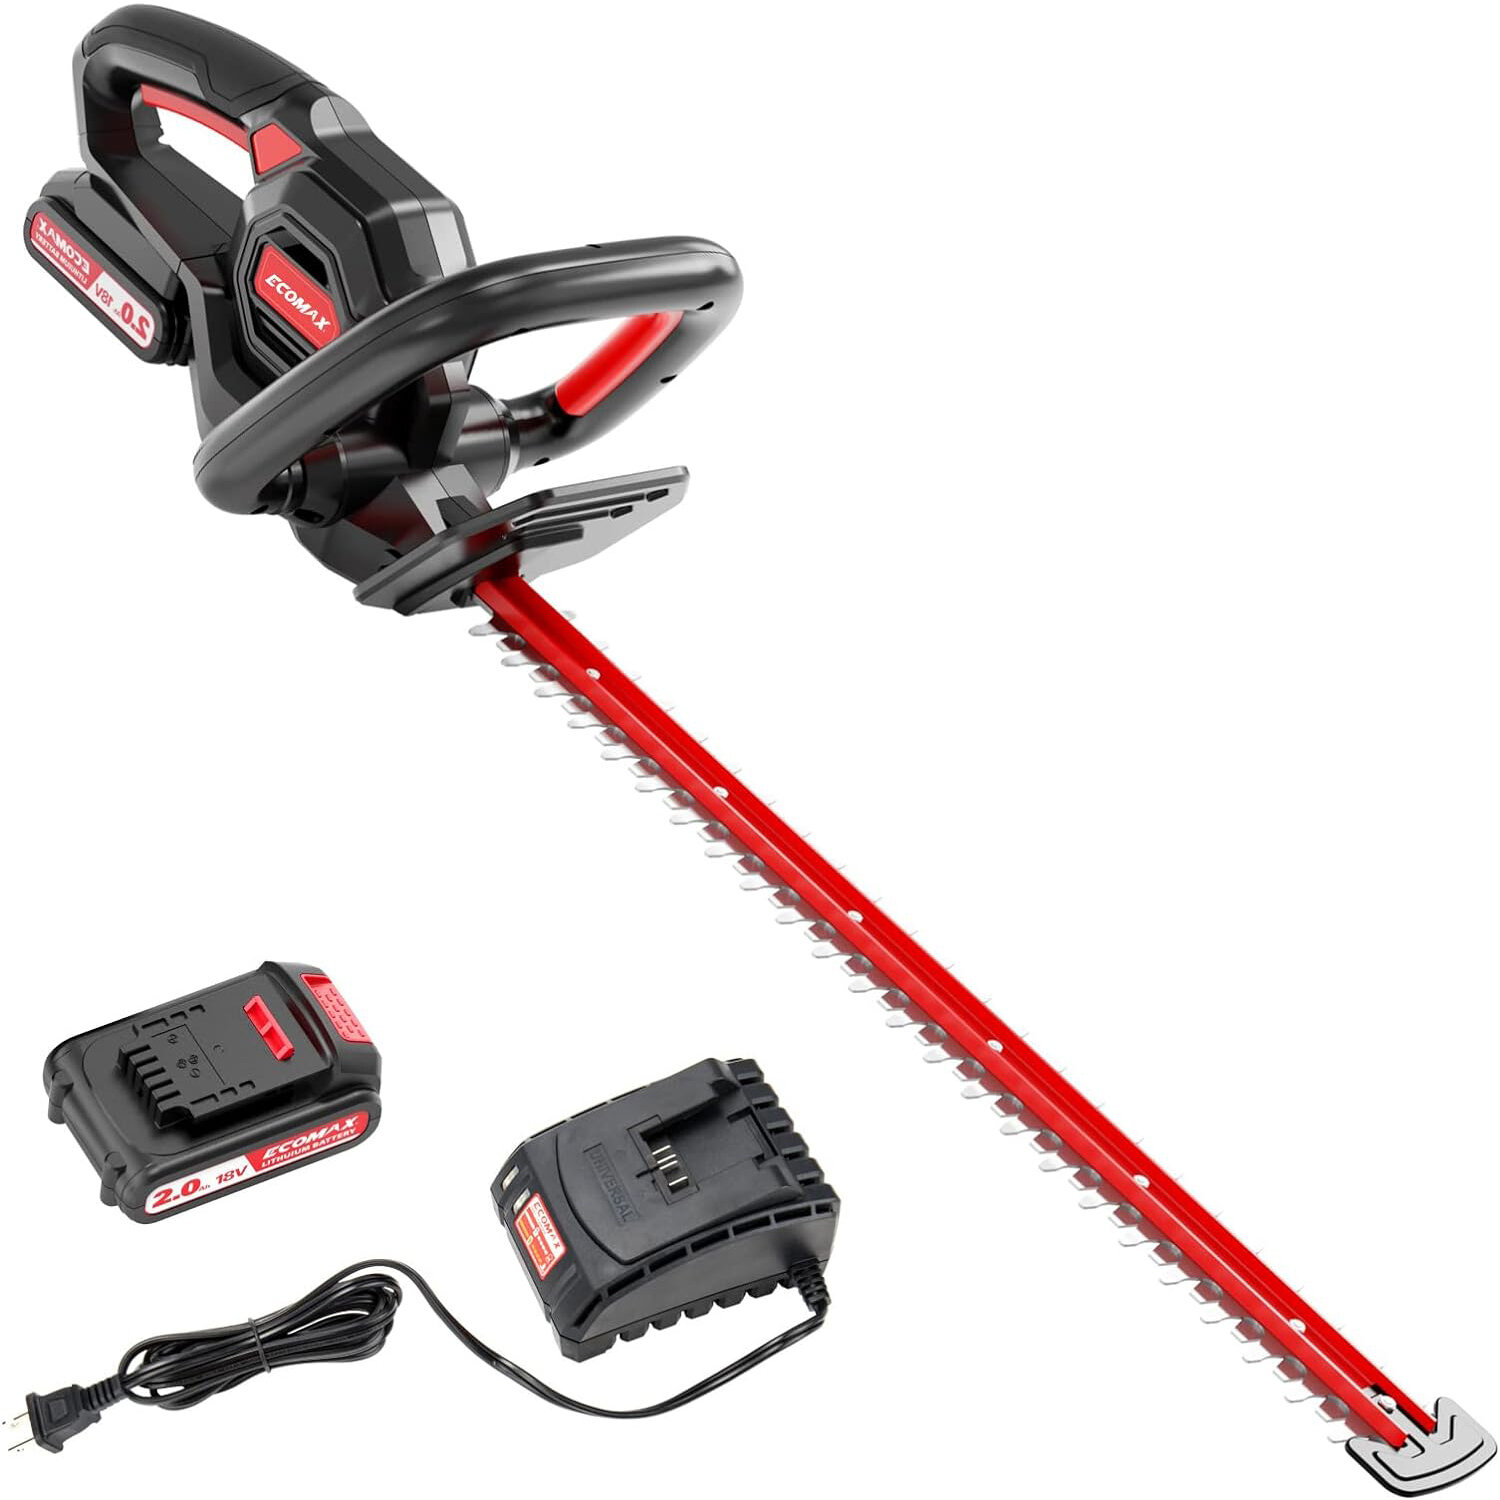 

[USA Direct] ECOMAX ELG06 18V 22-Inch Cordless Hedge Trimmer Ideal for Pruning Branches in Your Backyard, Garden Hedge T